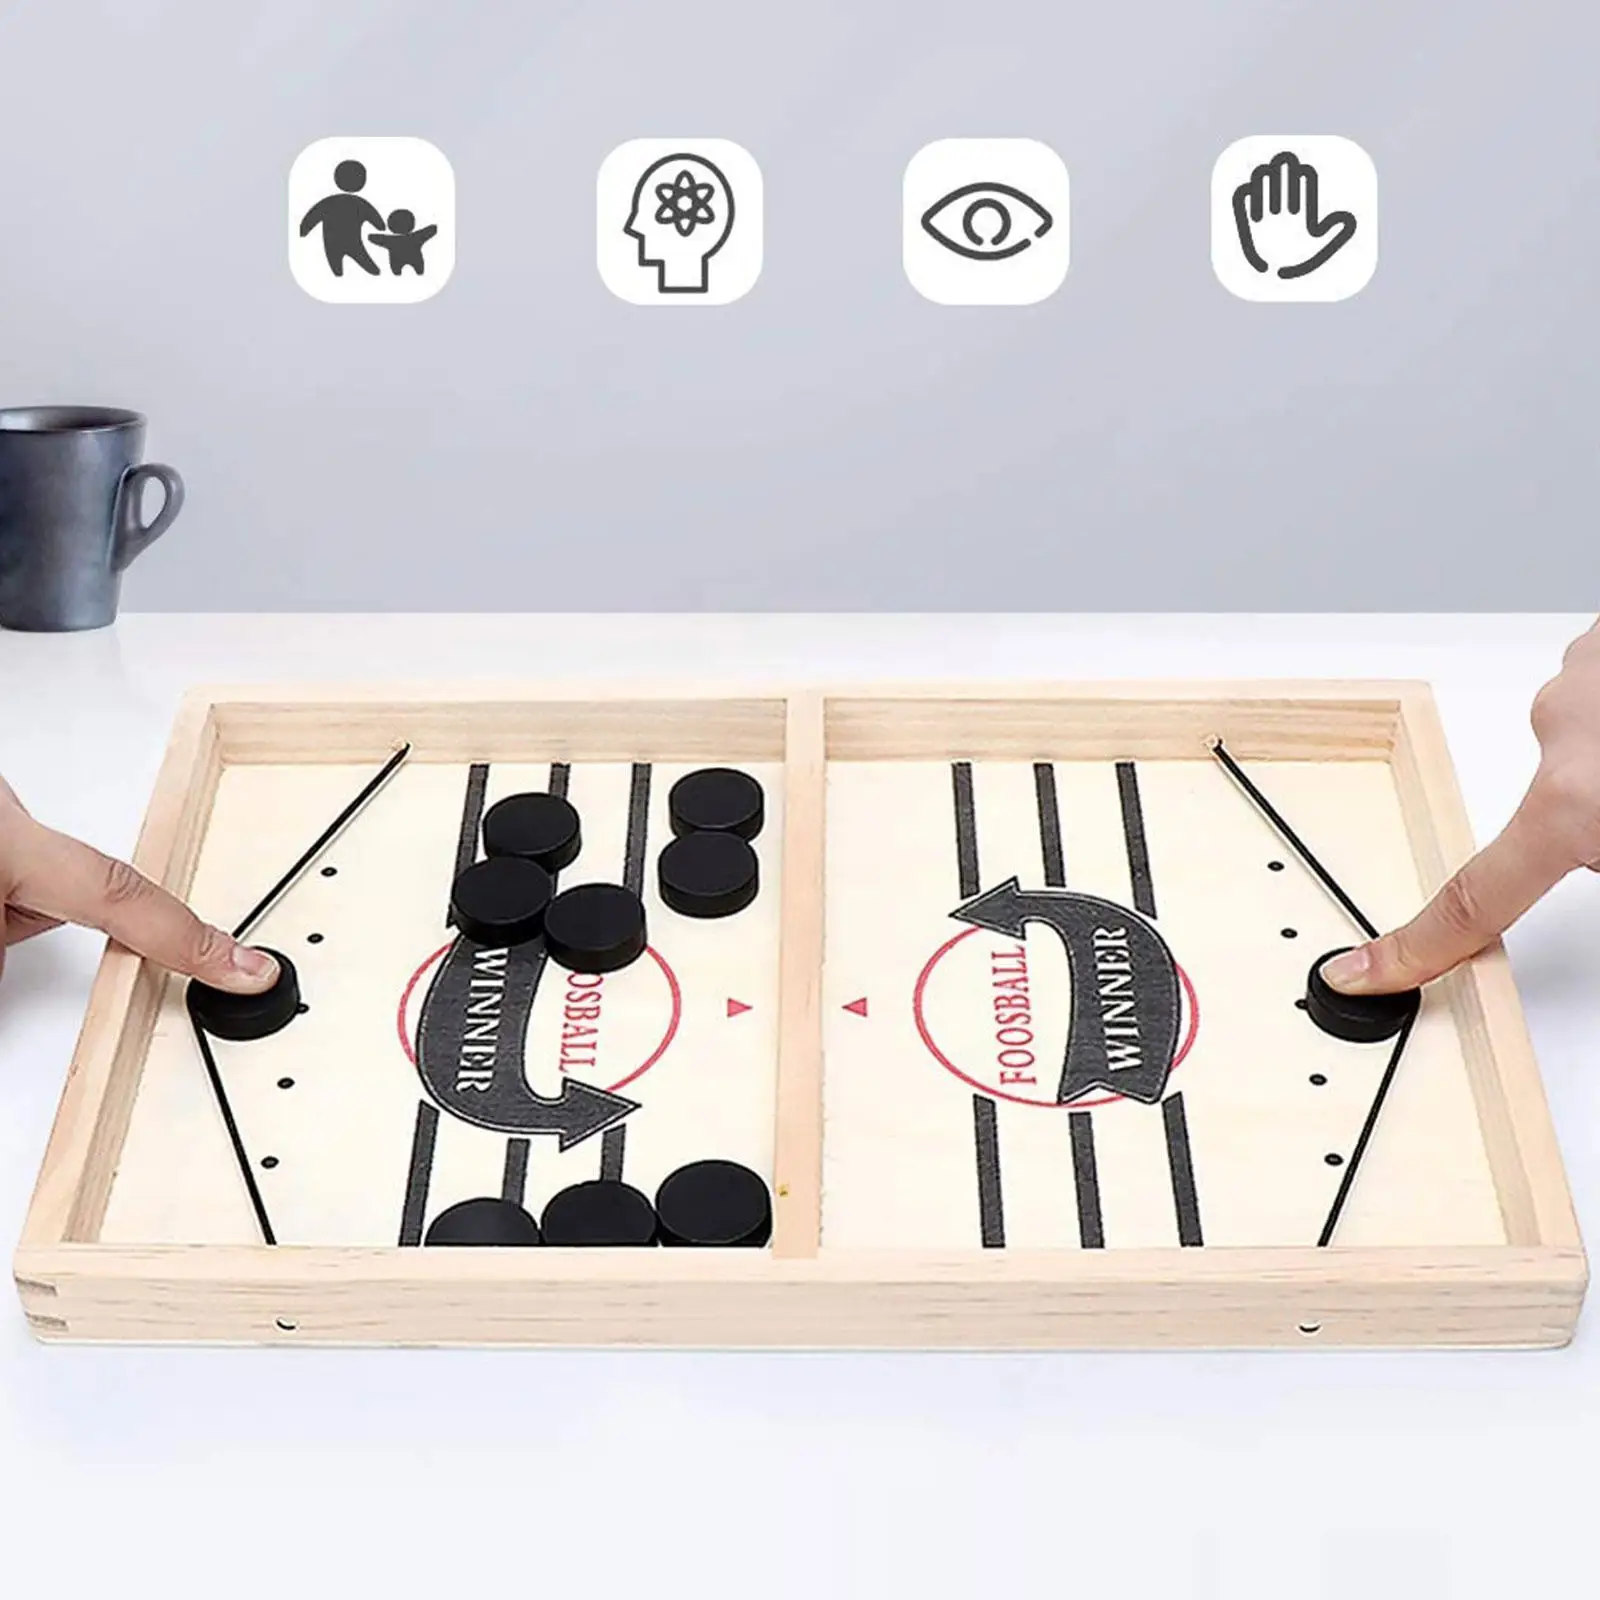 Foosball Winner Games Table Hockey Game Catapult Chess Fast Sling Puck Board Game Toys For Children Parent-child Interactiv E8S8